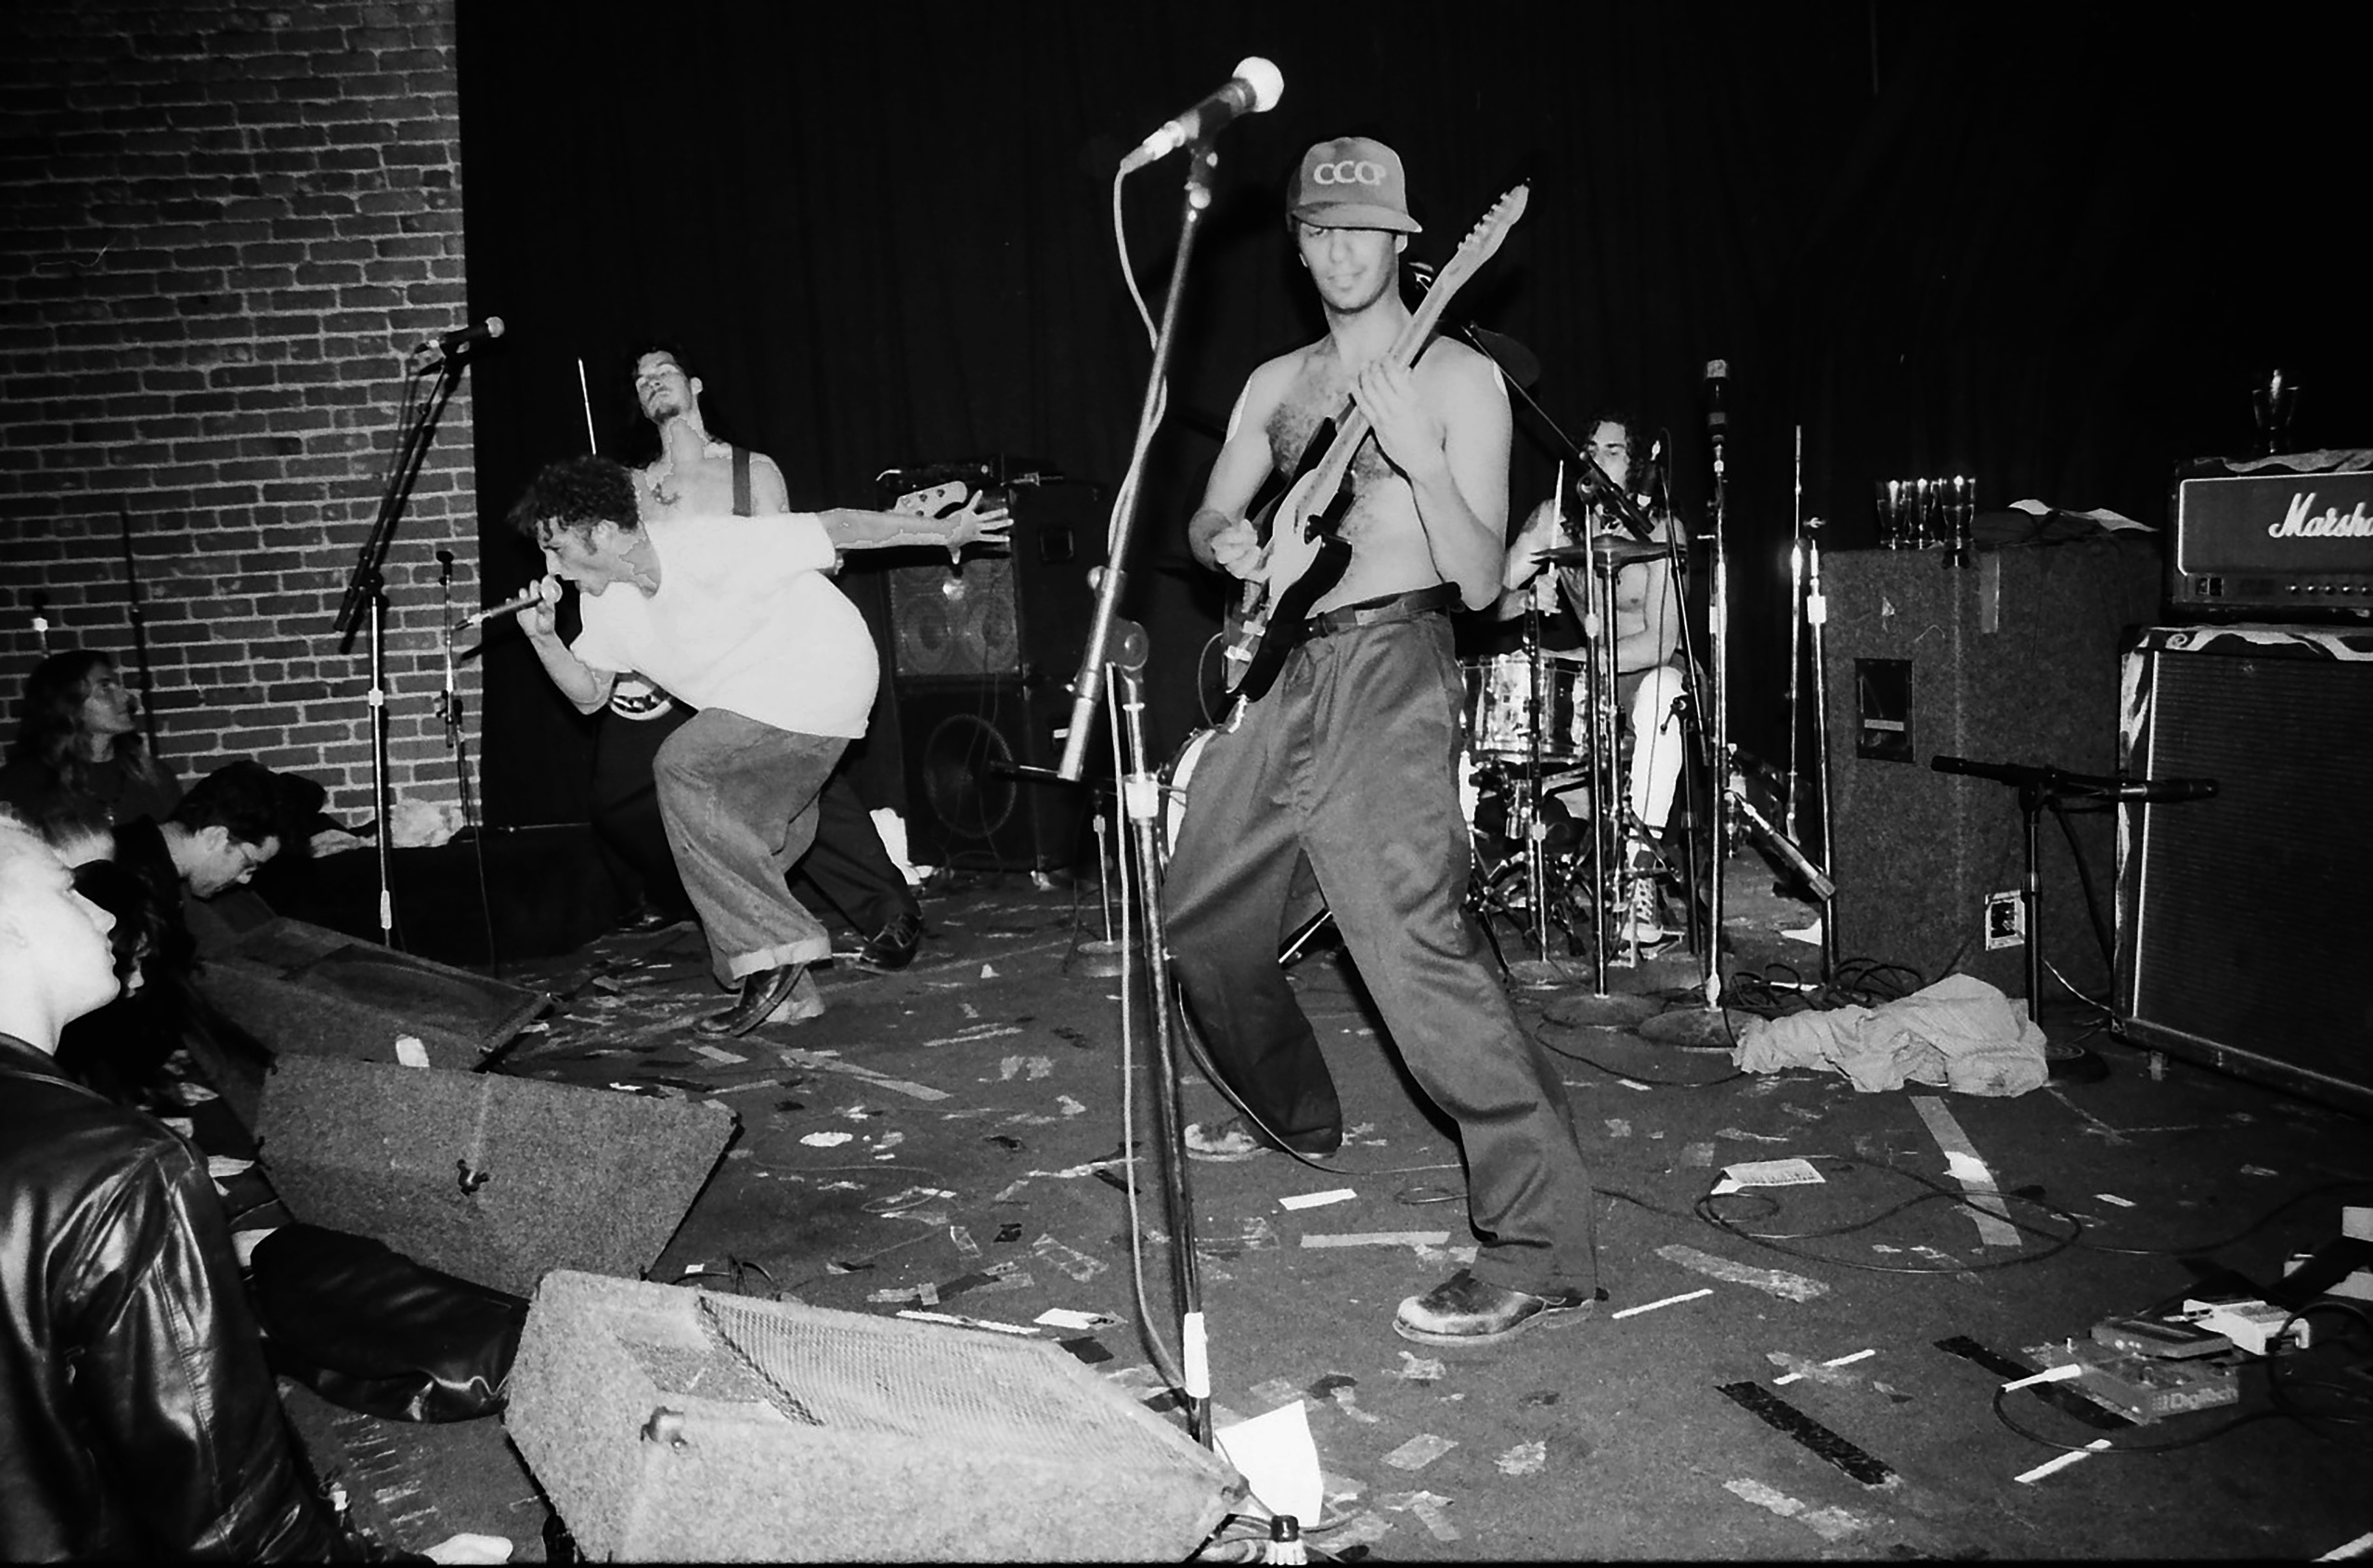 The Most Influential Artists: #10 Rage Against the Machine